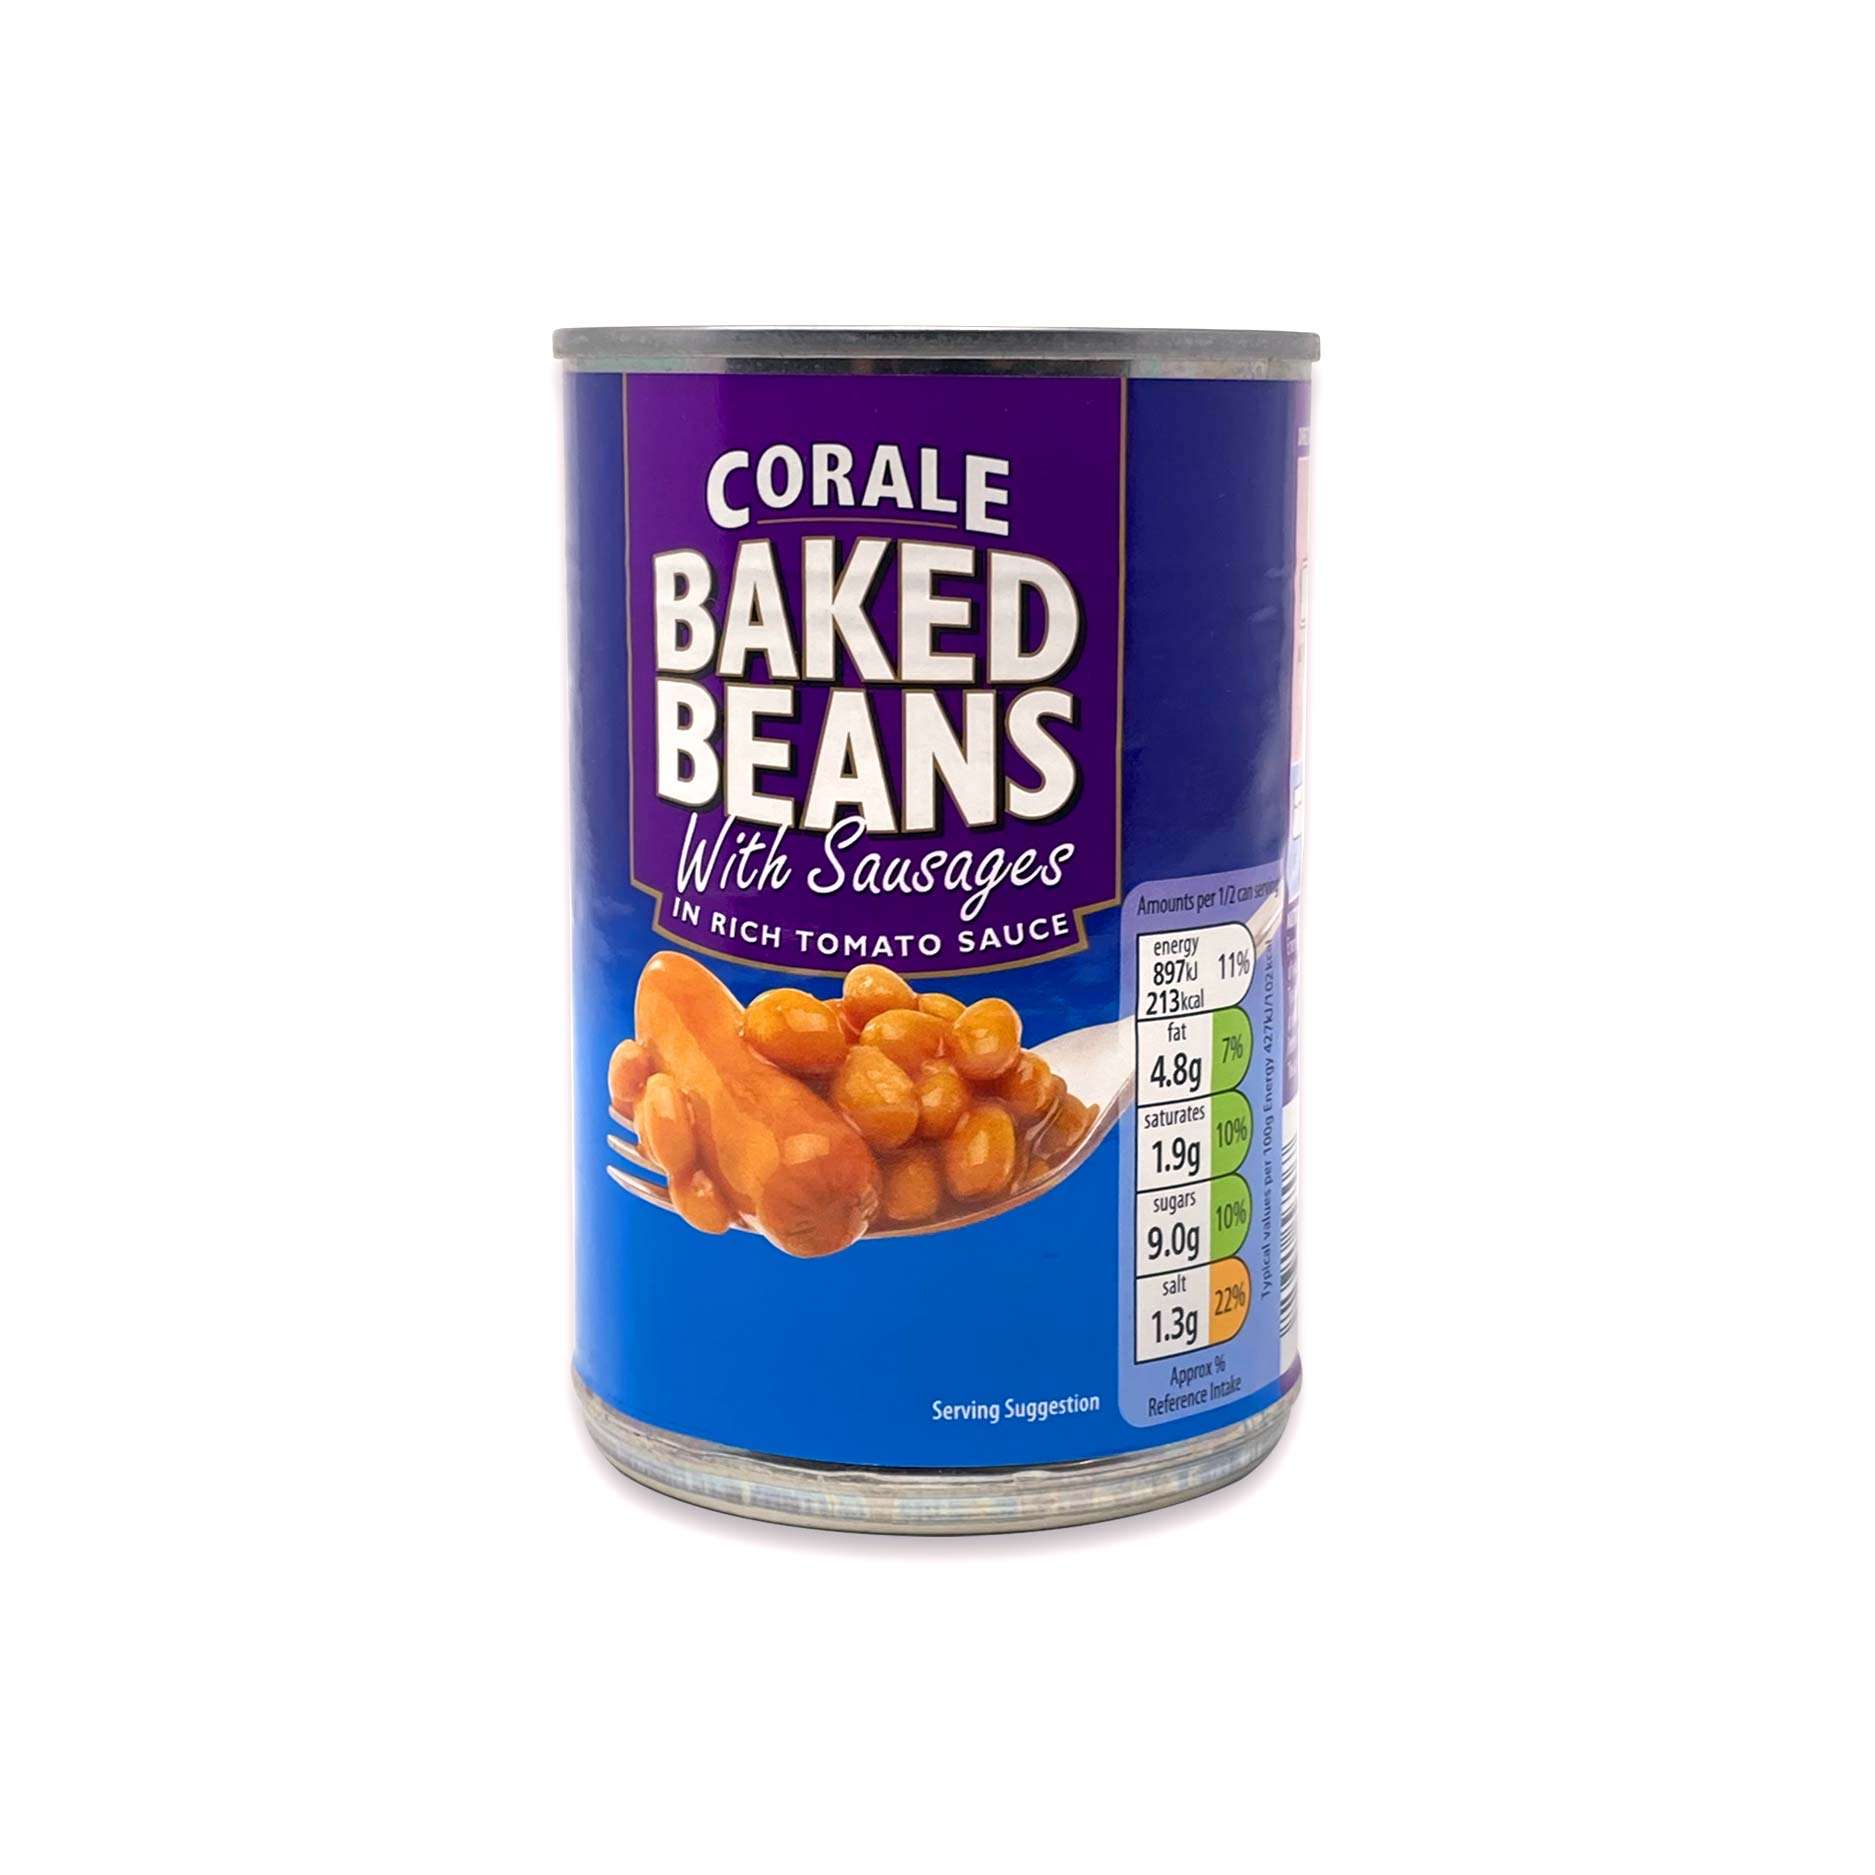 Corale Baked Beans With Sausages 420g